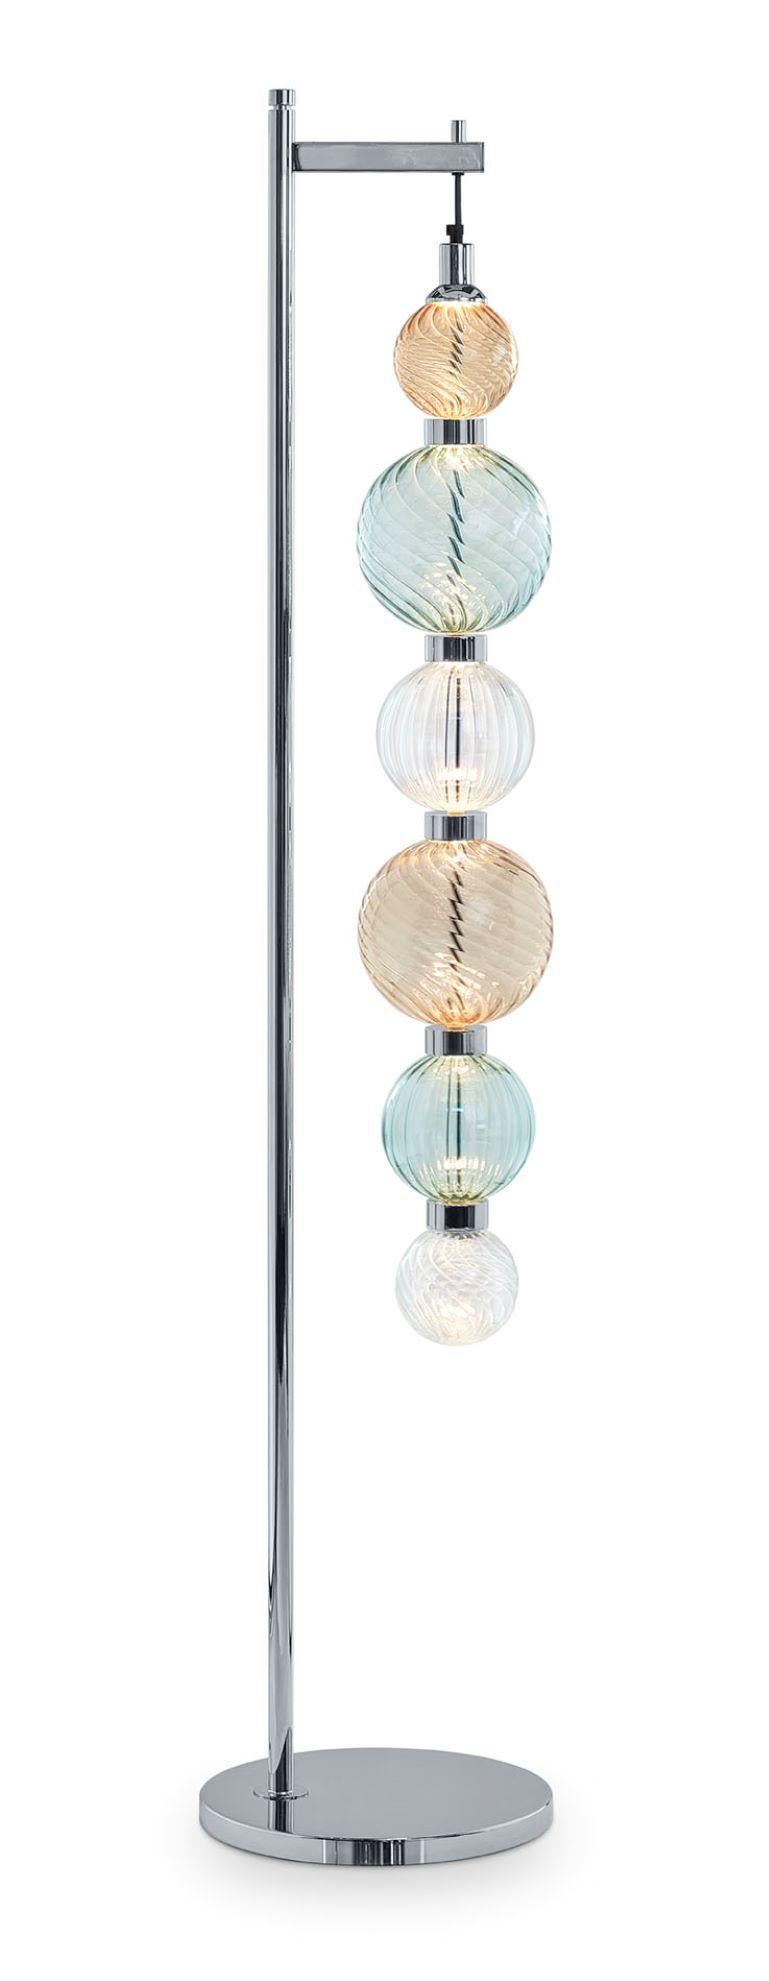 Floor Lamp Polished Champagne or Chrome Finish Murano Glass Spheres Customizable In New Condition For Sale In London, GB